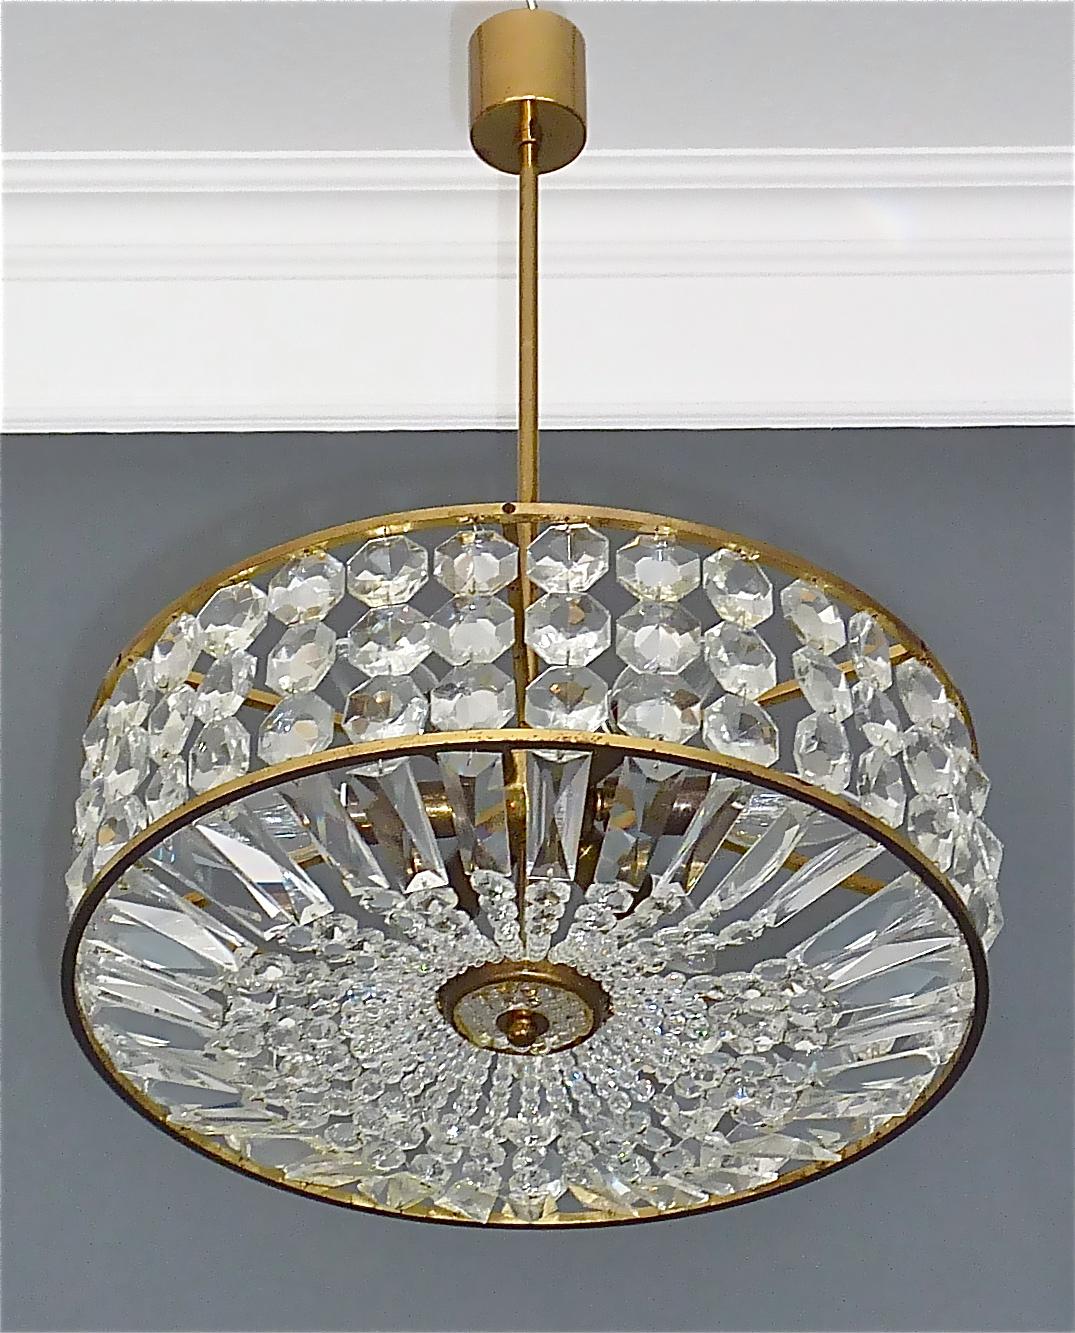 Midcentury Lobmeyr Style Drum Chandelier Patinated Brass Crystal Glass 1950s For Sale 7